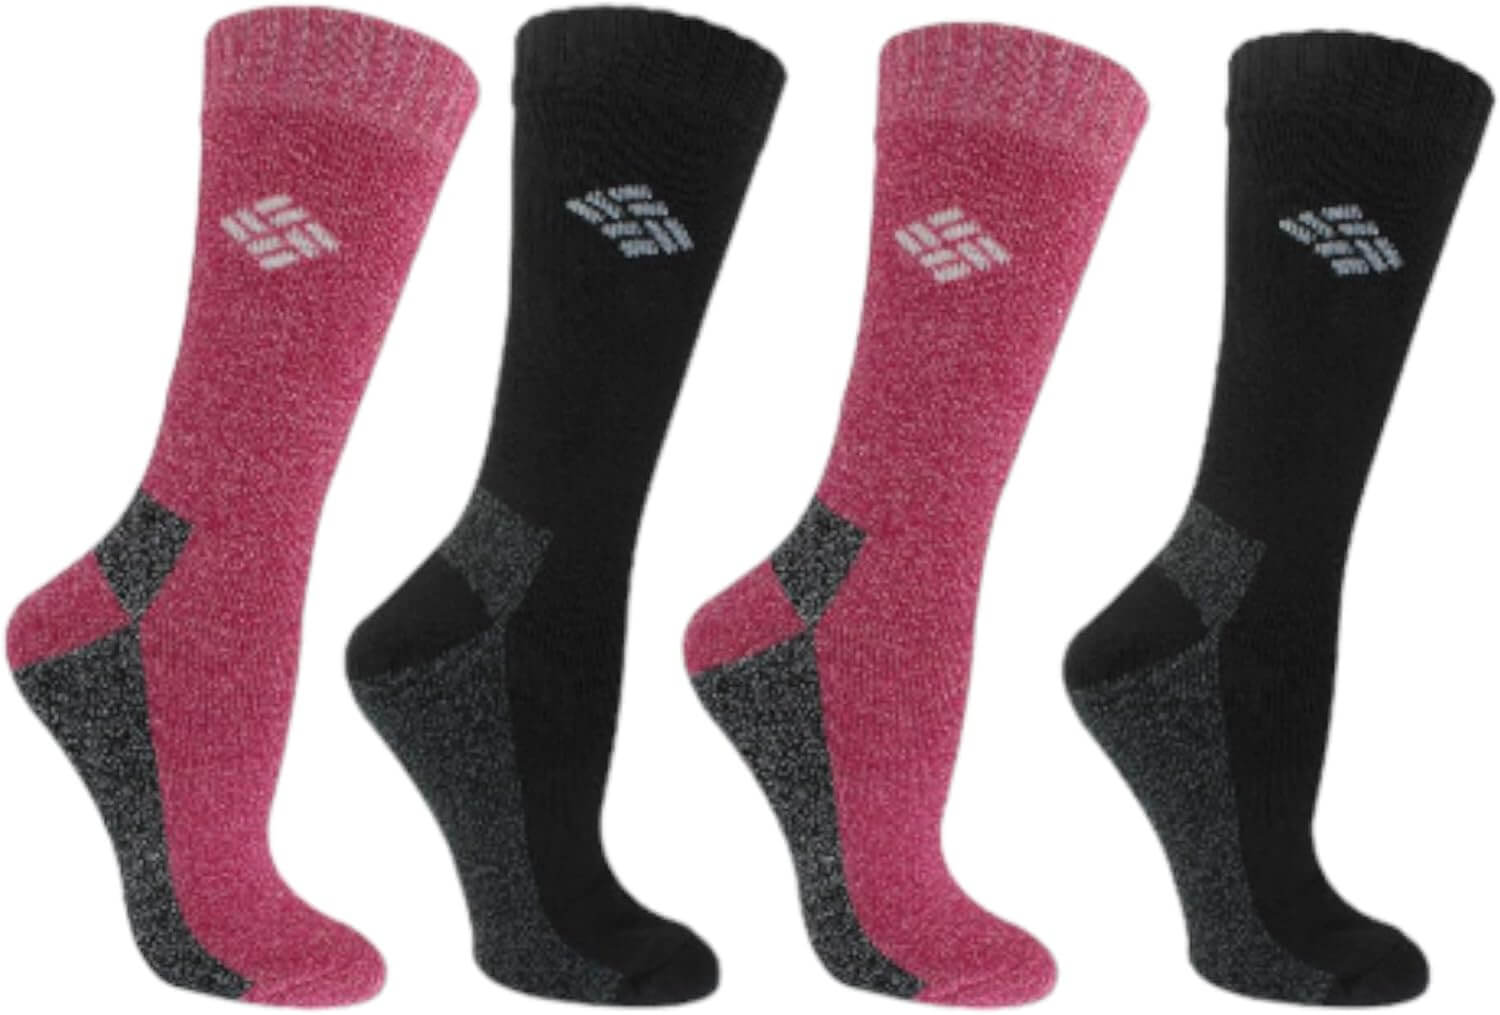 Shop The Latest >Columbia Women's 4 Pack Moisture Control Crew Socks > *Only $38.02*> From The Top Brand > *Columbial* > Shop Now and Get Free Shipping On Orders Over $45.00 >*Shop Earth Foot*